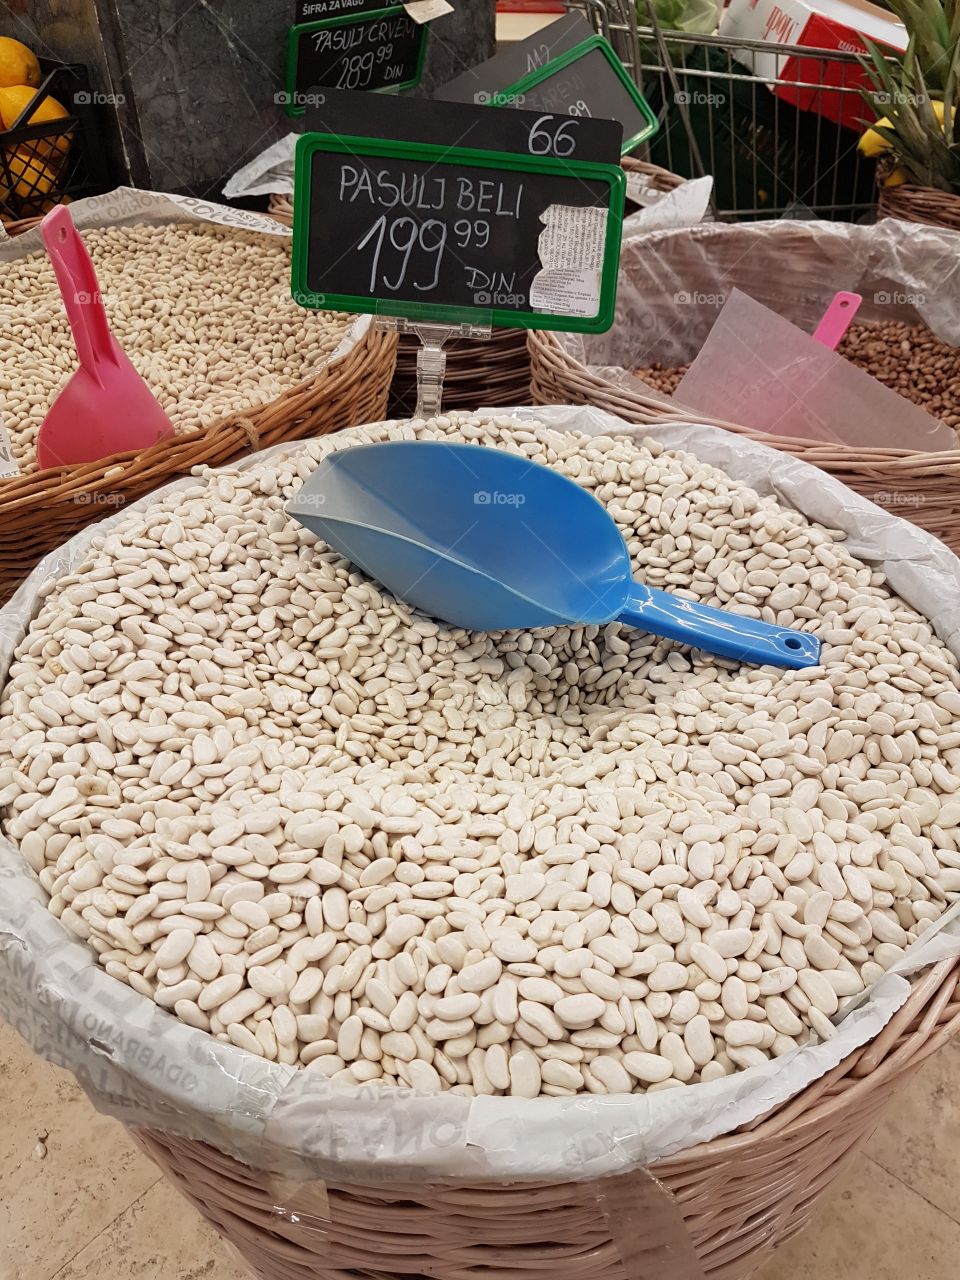 beans in the supermarket